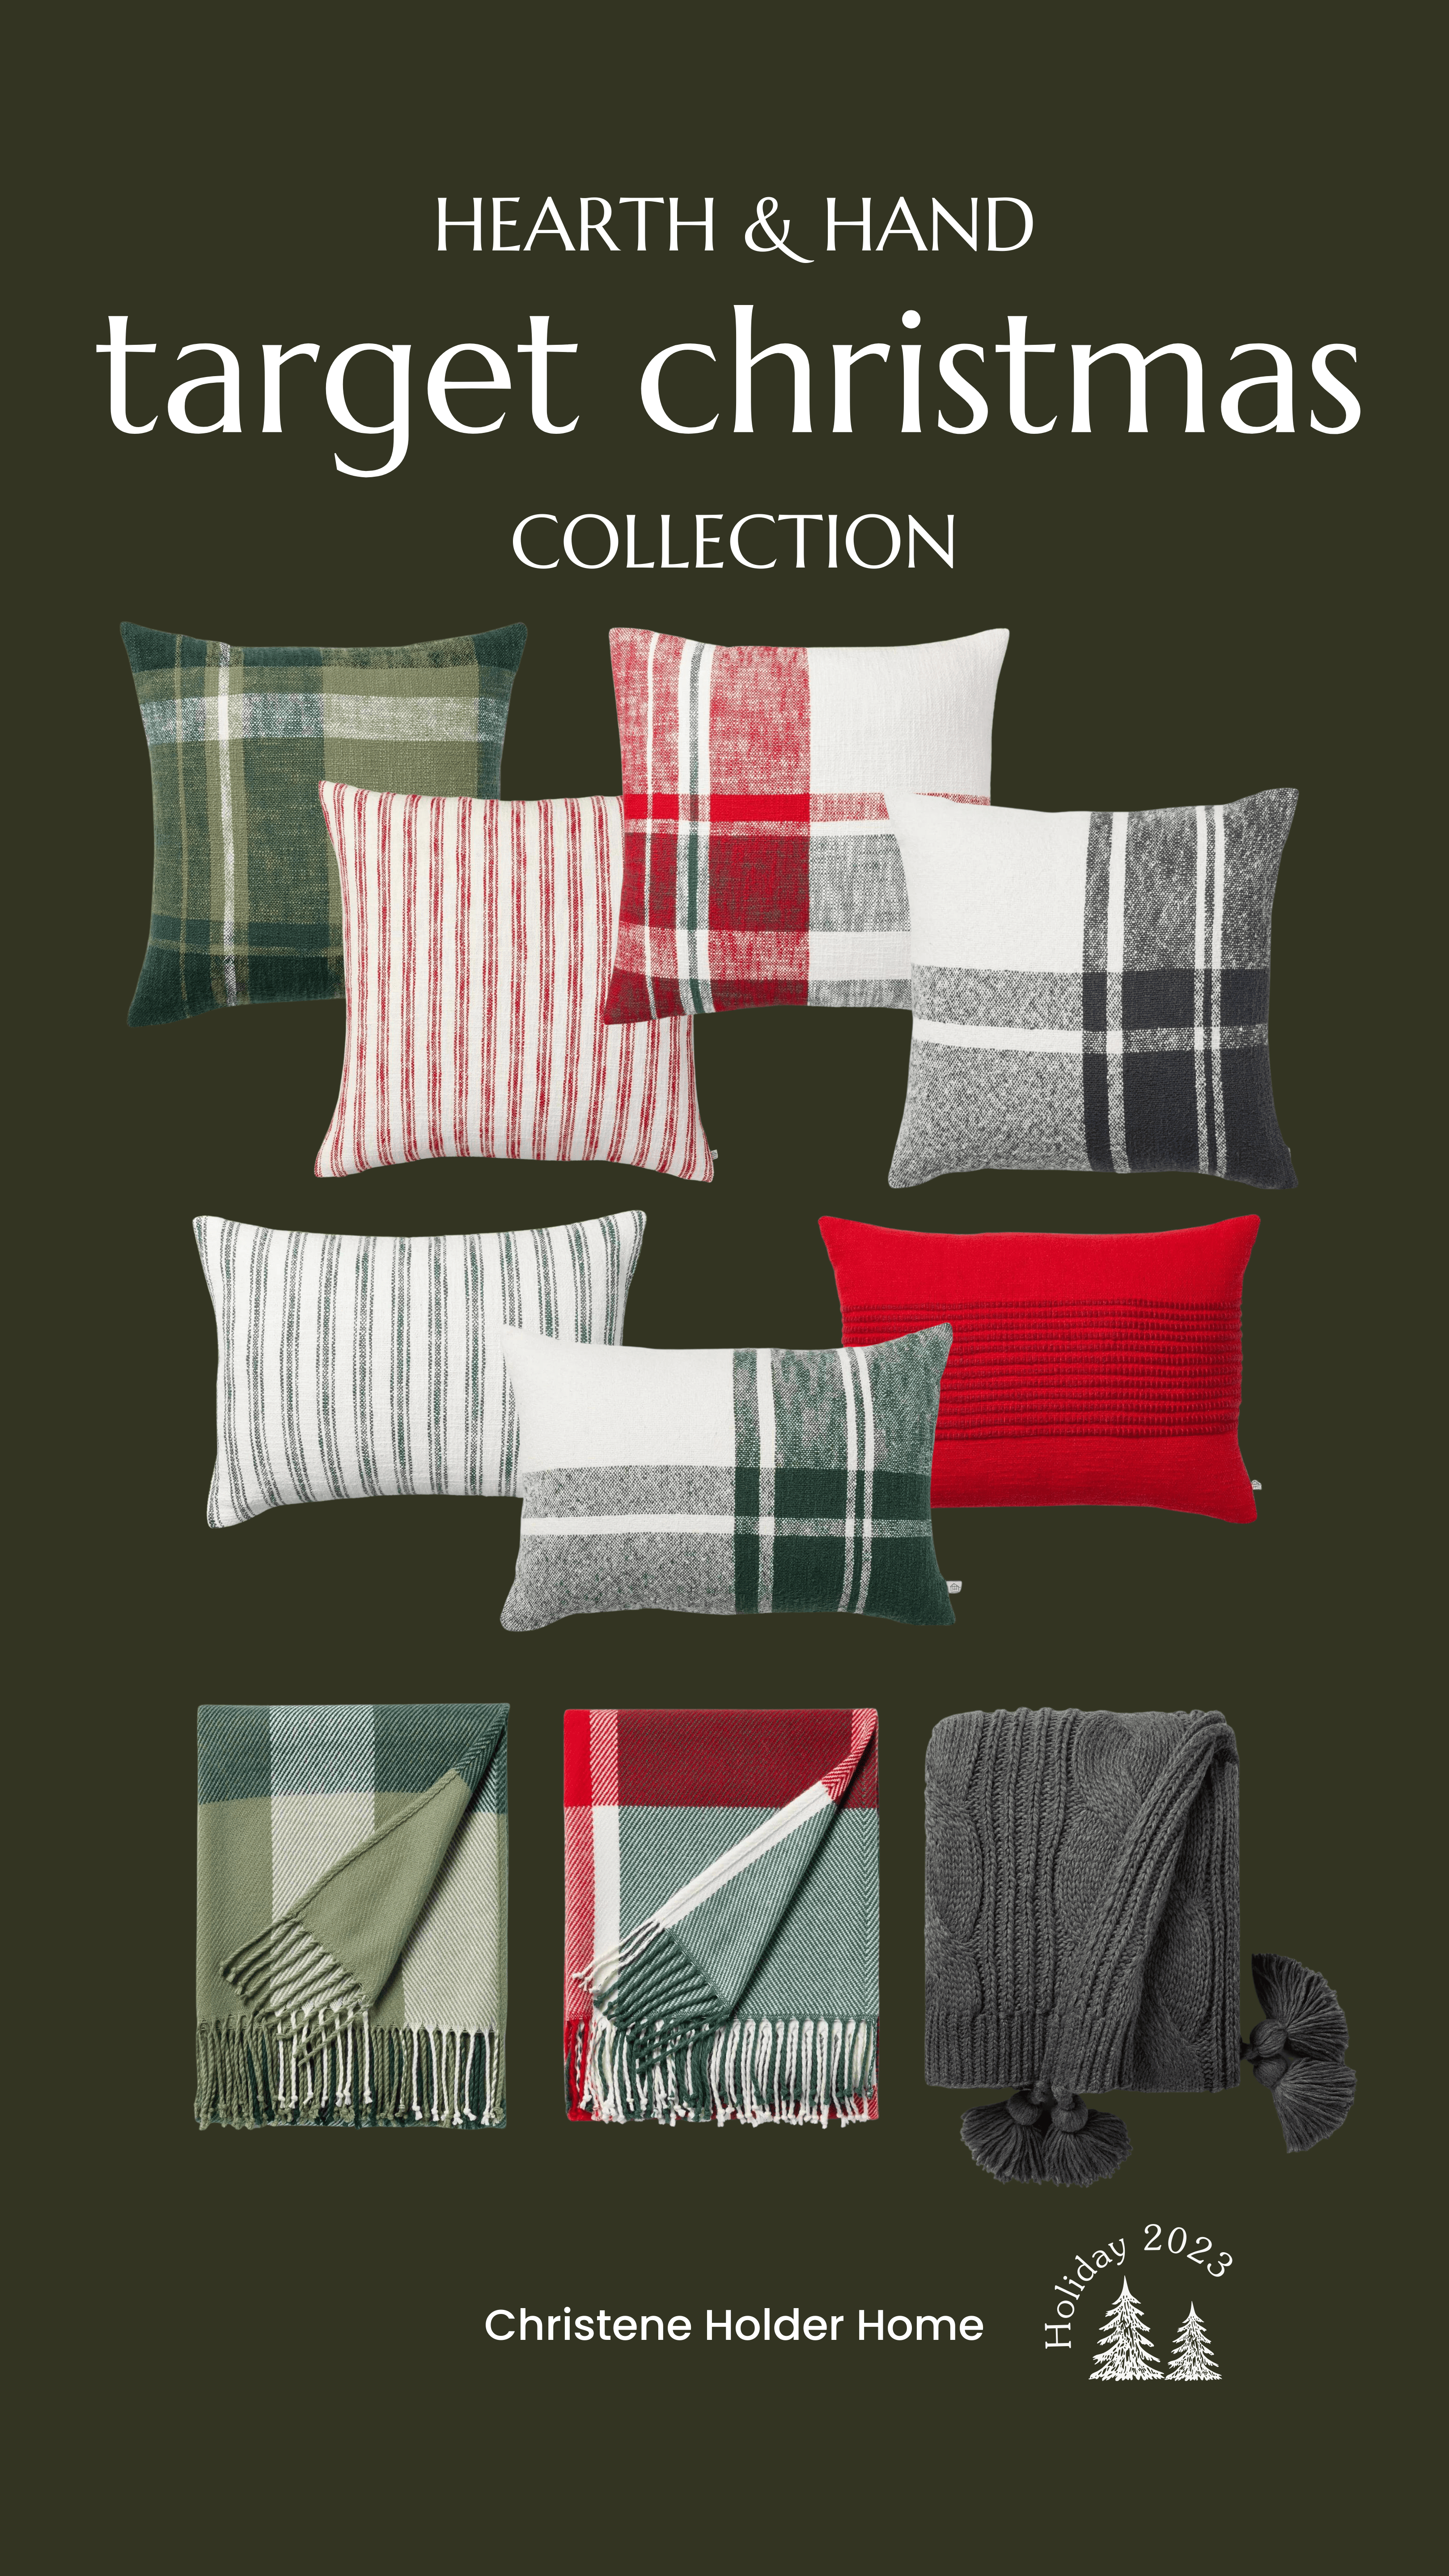 hearth and hand target christmas collection pillows